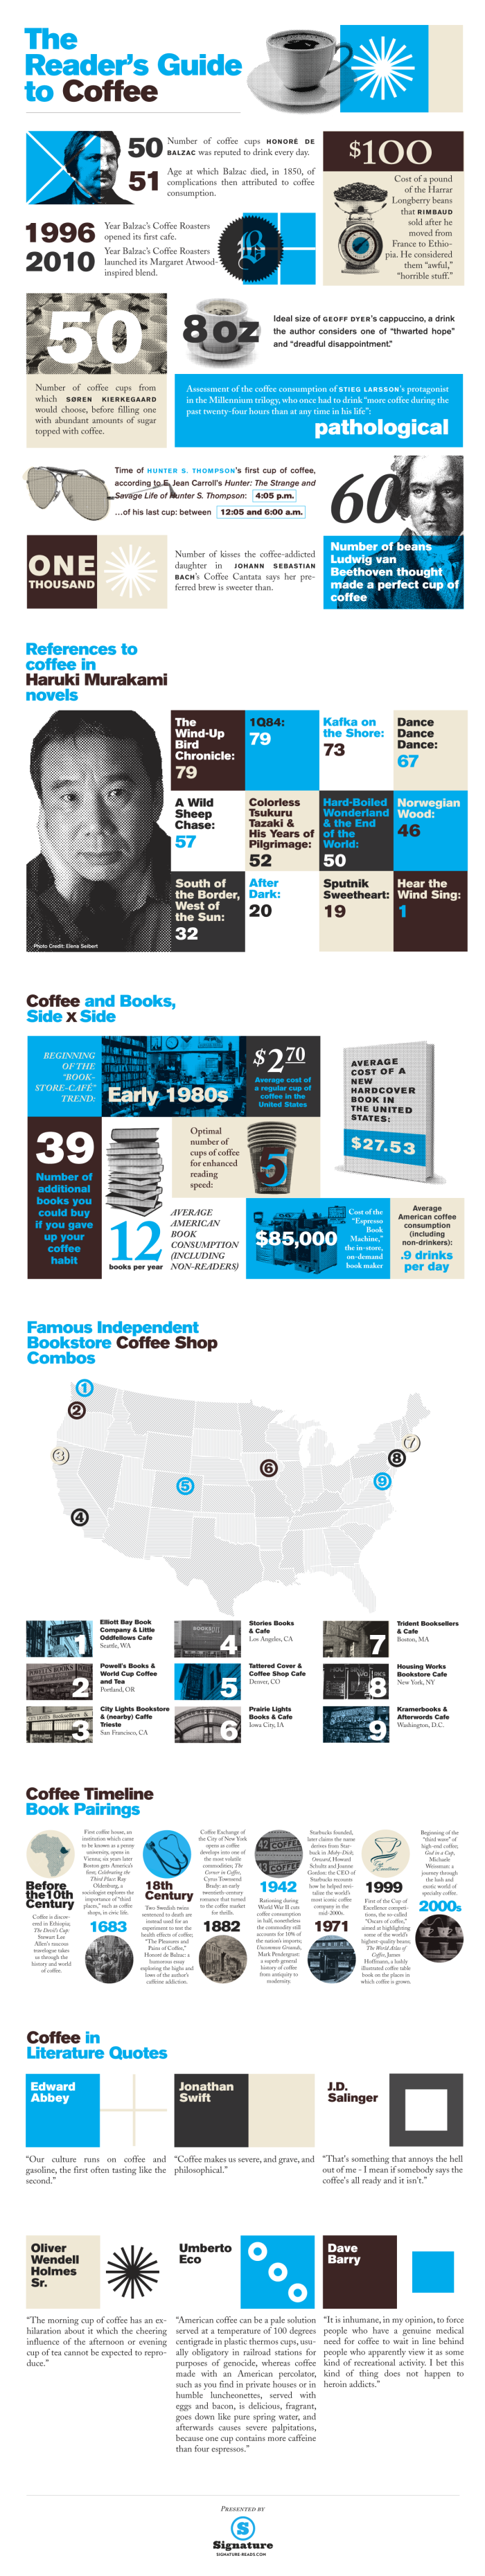 Book-Lovers-Guide-to-Coffee-Infographic